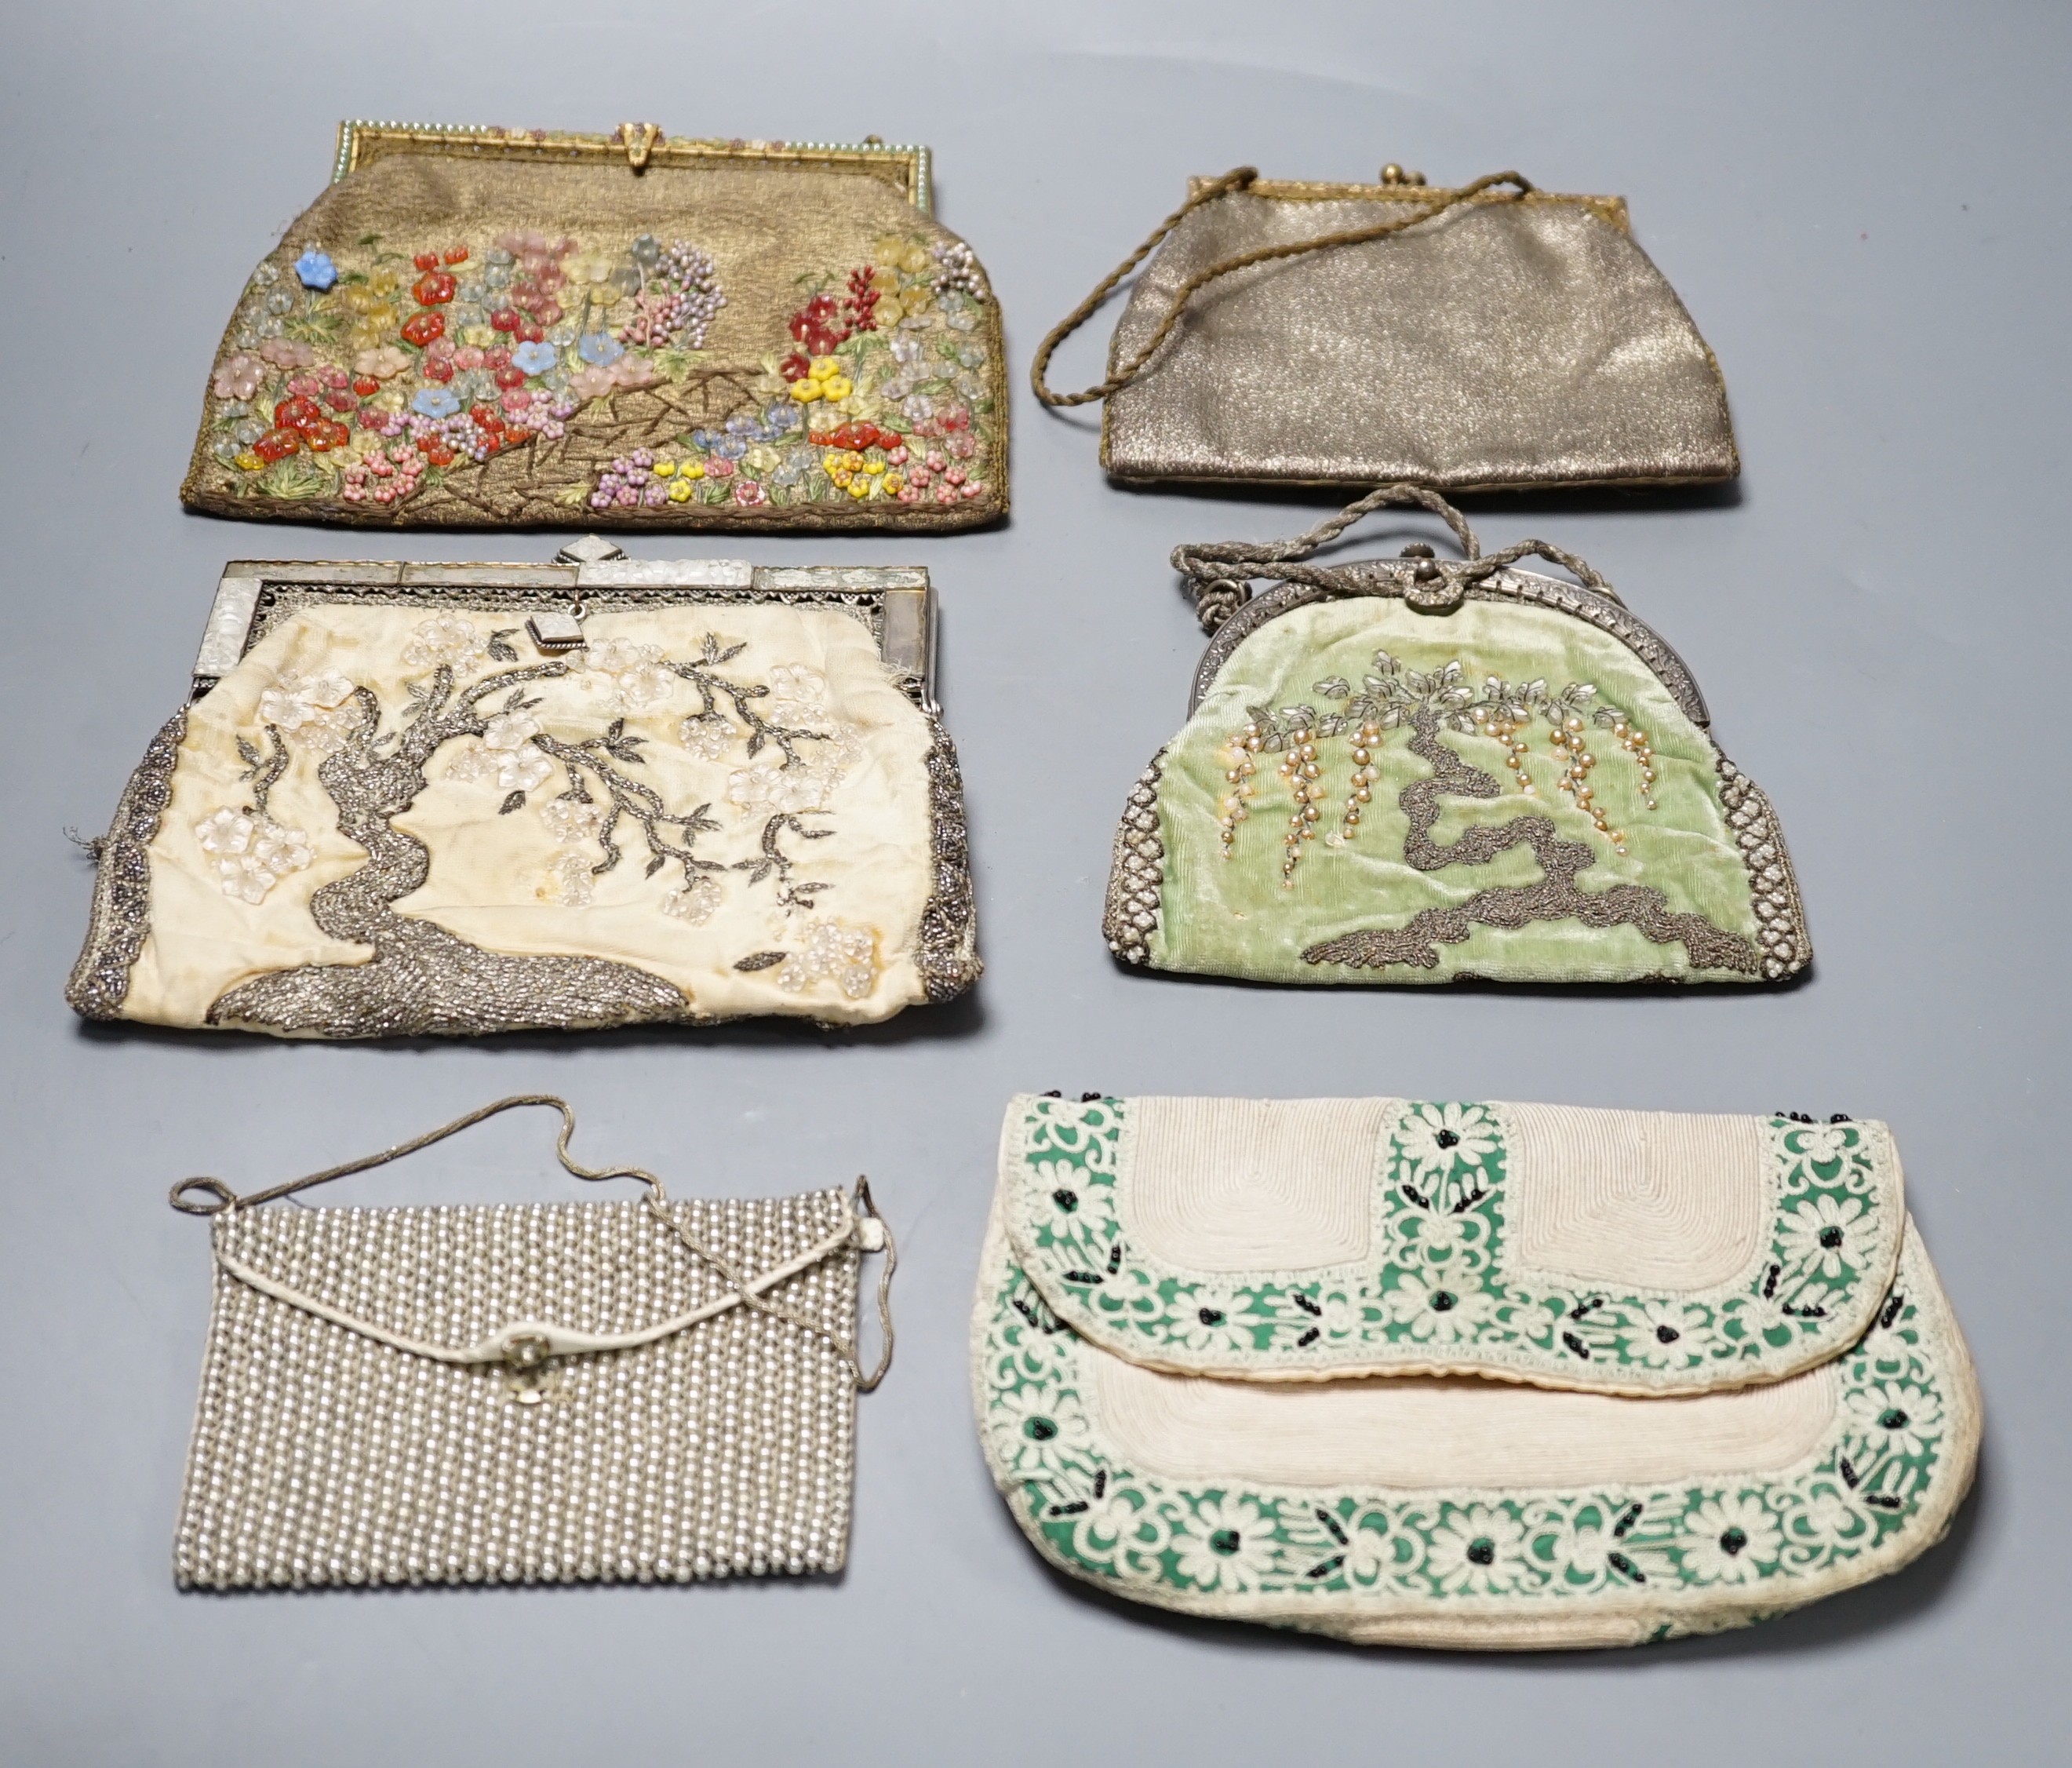 Four hand made evening bags with applice designs, a chain stitch clutch bag and a small bead work purse, largest 16 cms high